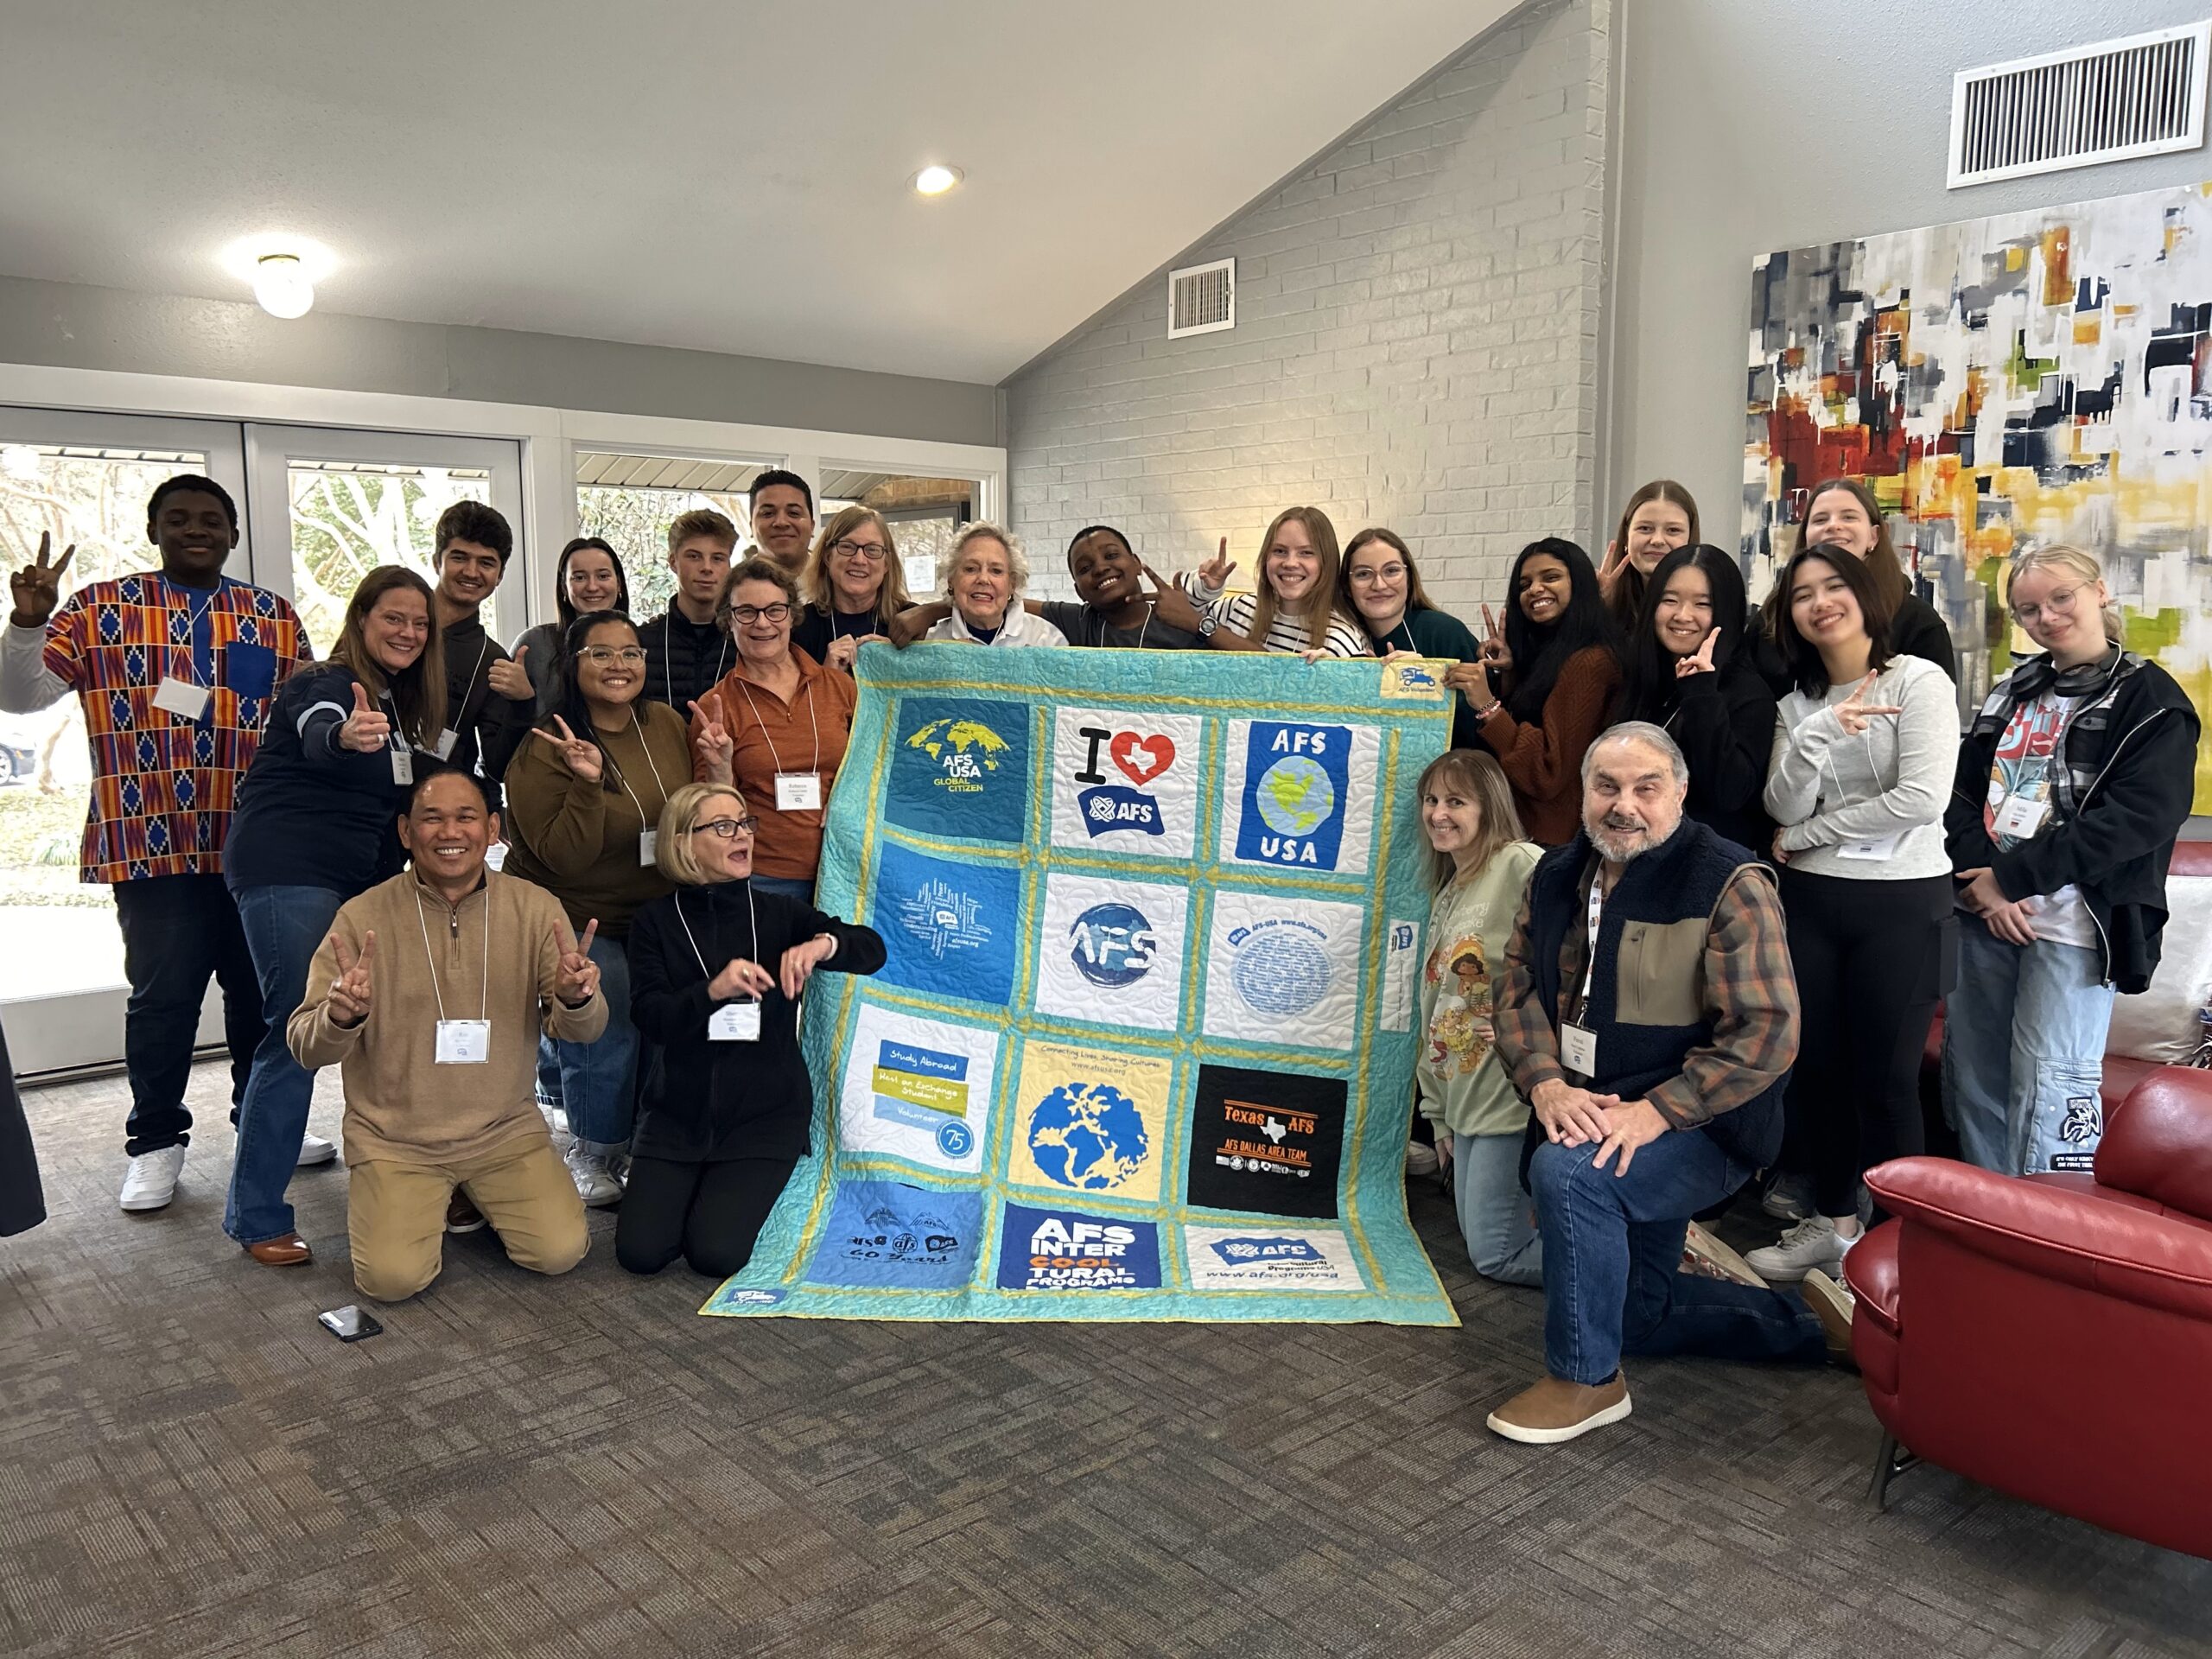 Dallas area team celebrating Donna's contributions with an AFS tshirt quilt